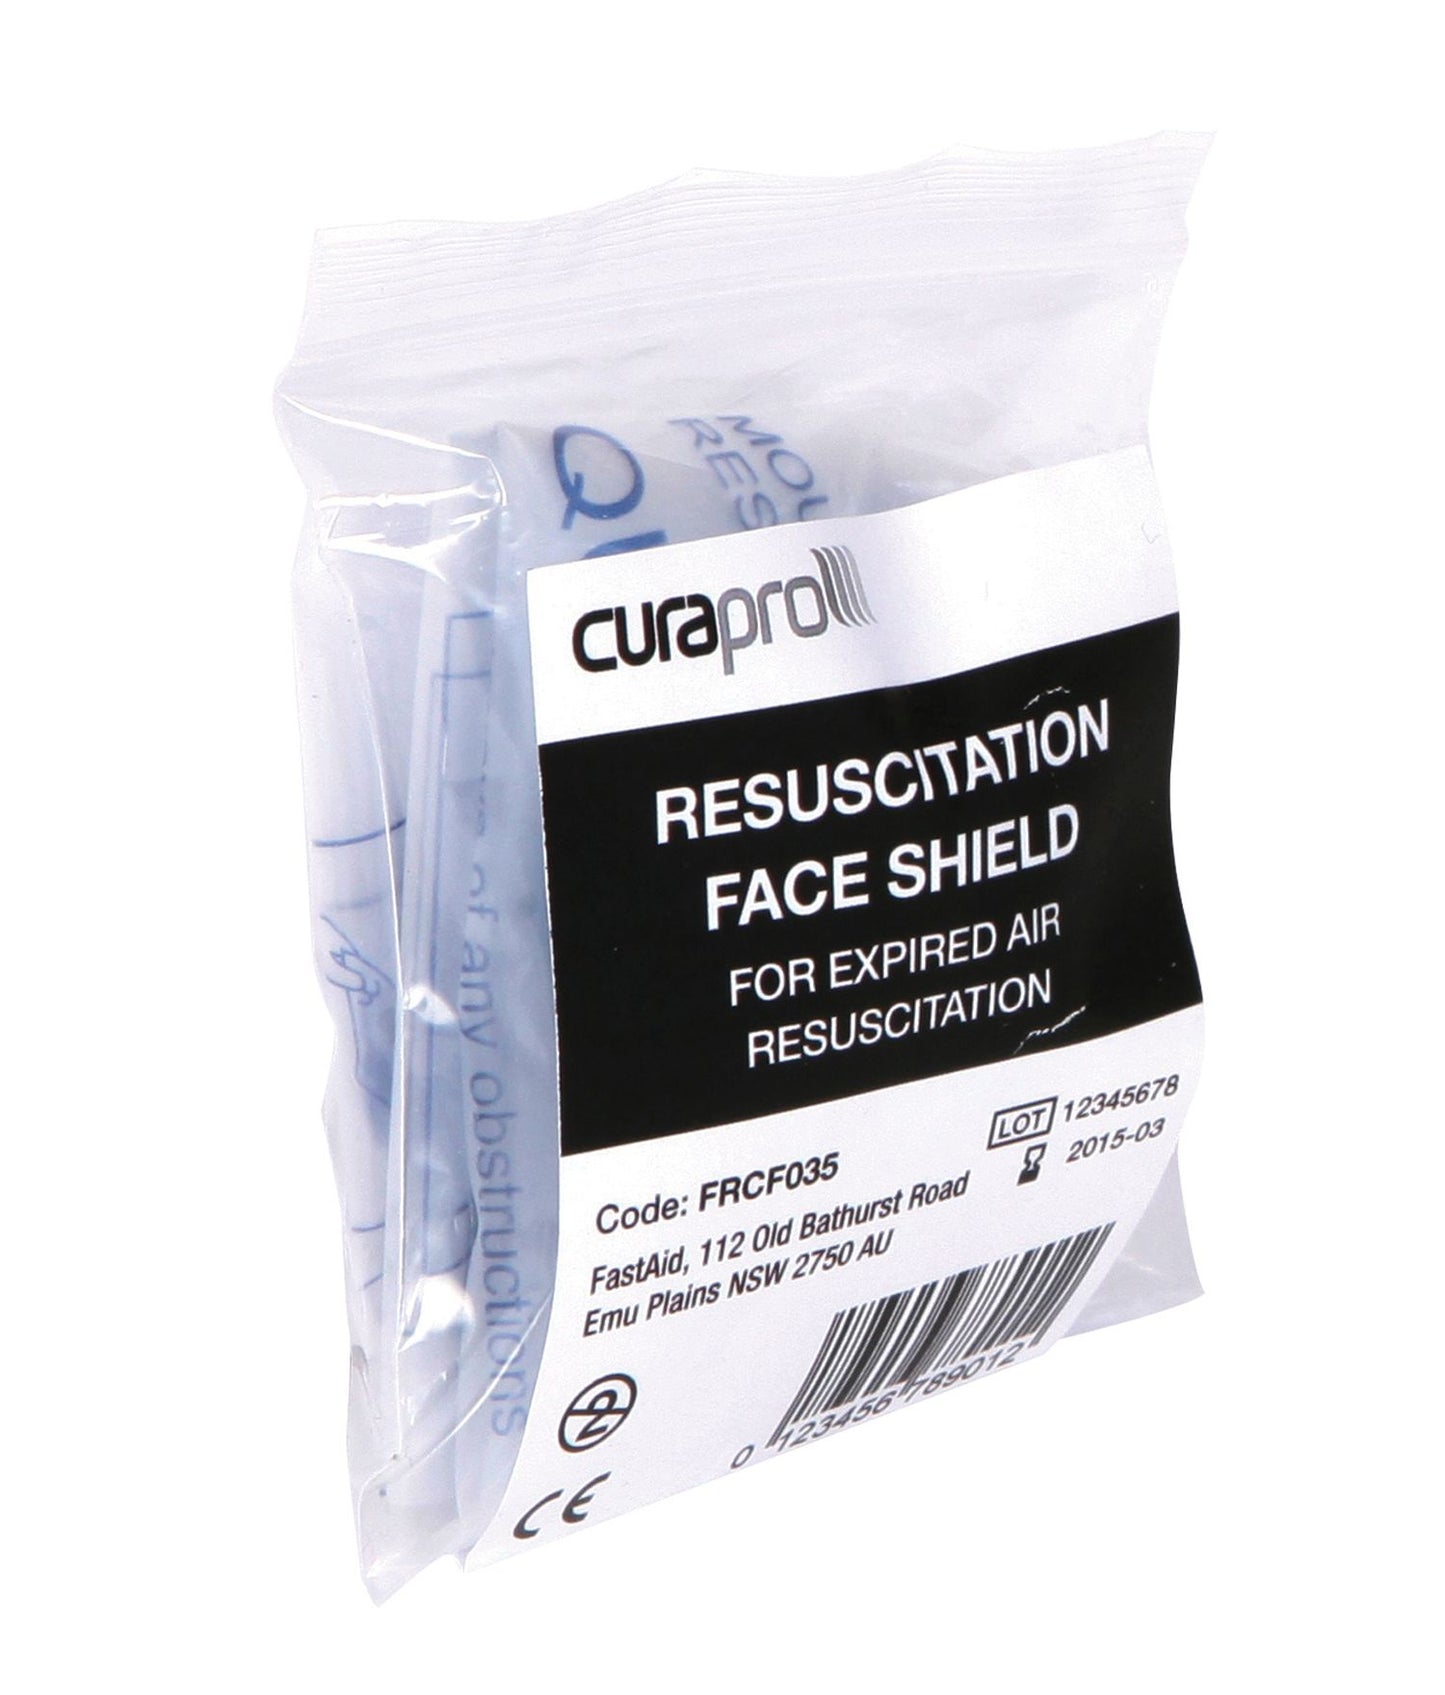 CPR RESUSCITATION FACE SHIELD, RCF035 - DISPOSABLE